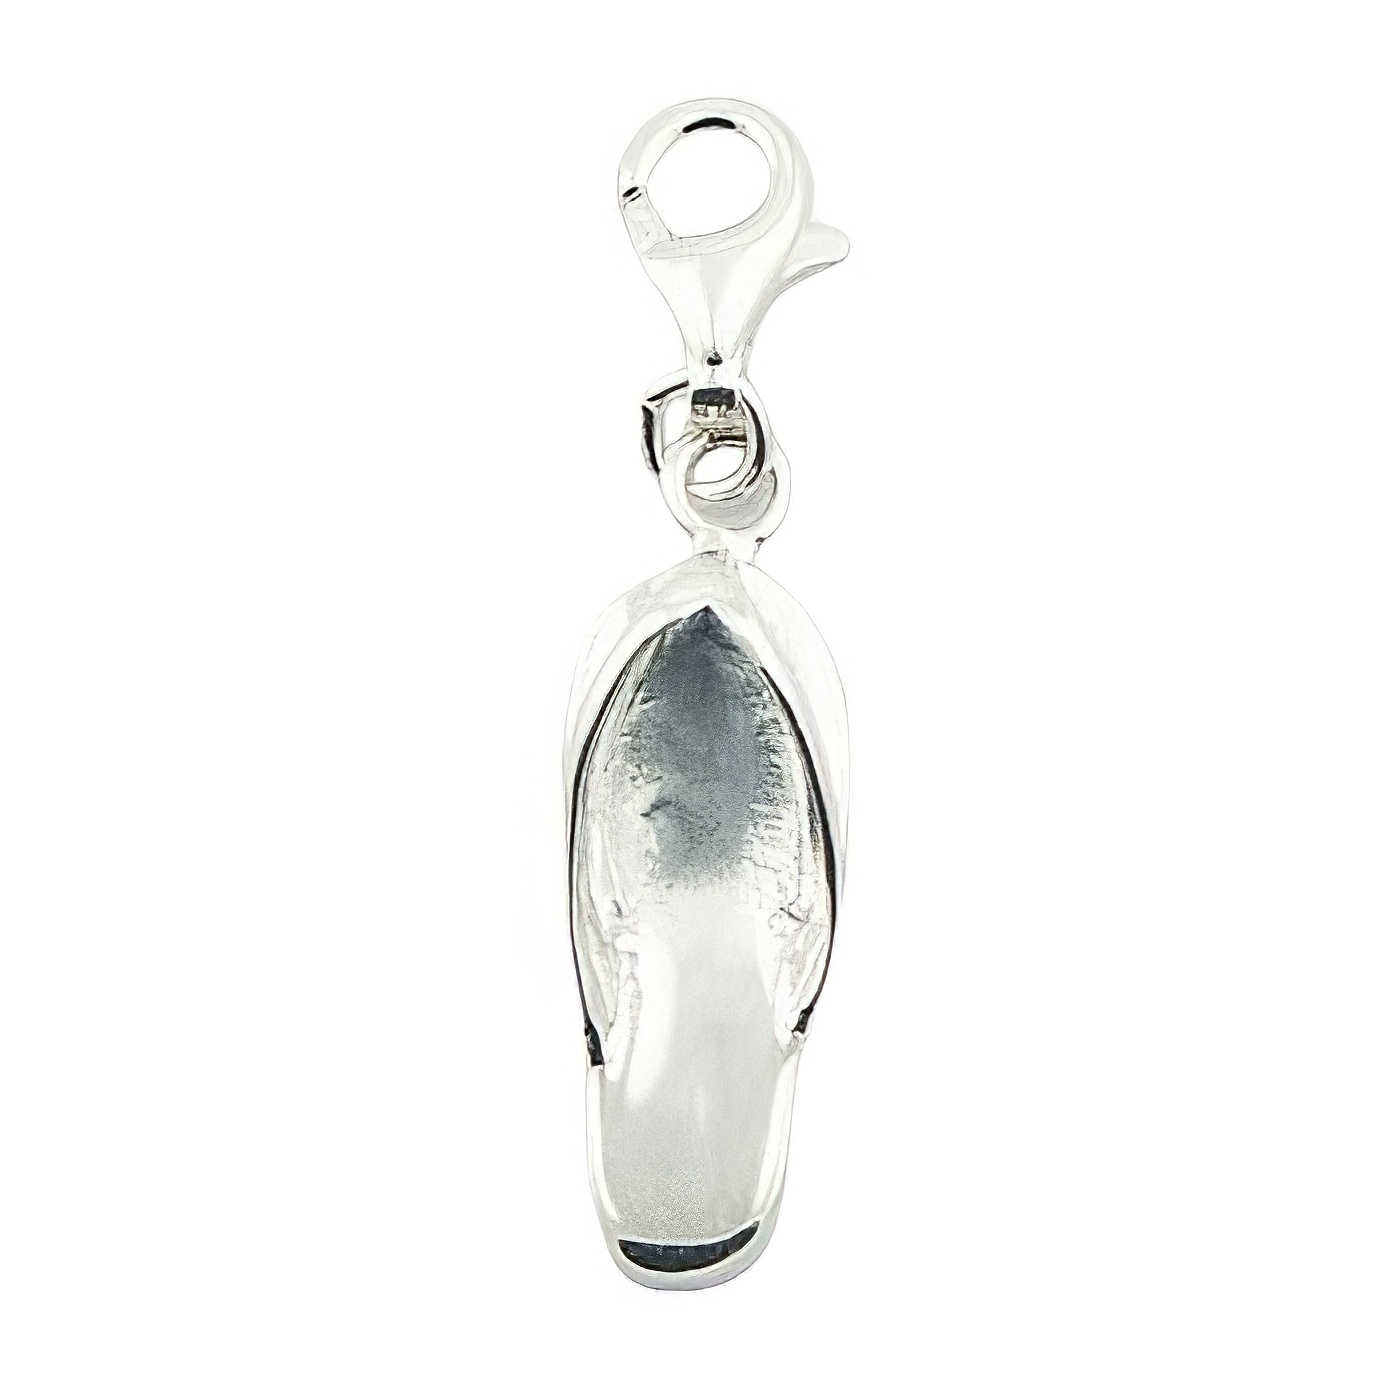 Authentical Sterling Silver Mini Fli-Flop Charm Pendant by BeYindi 